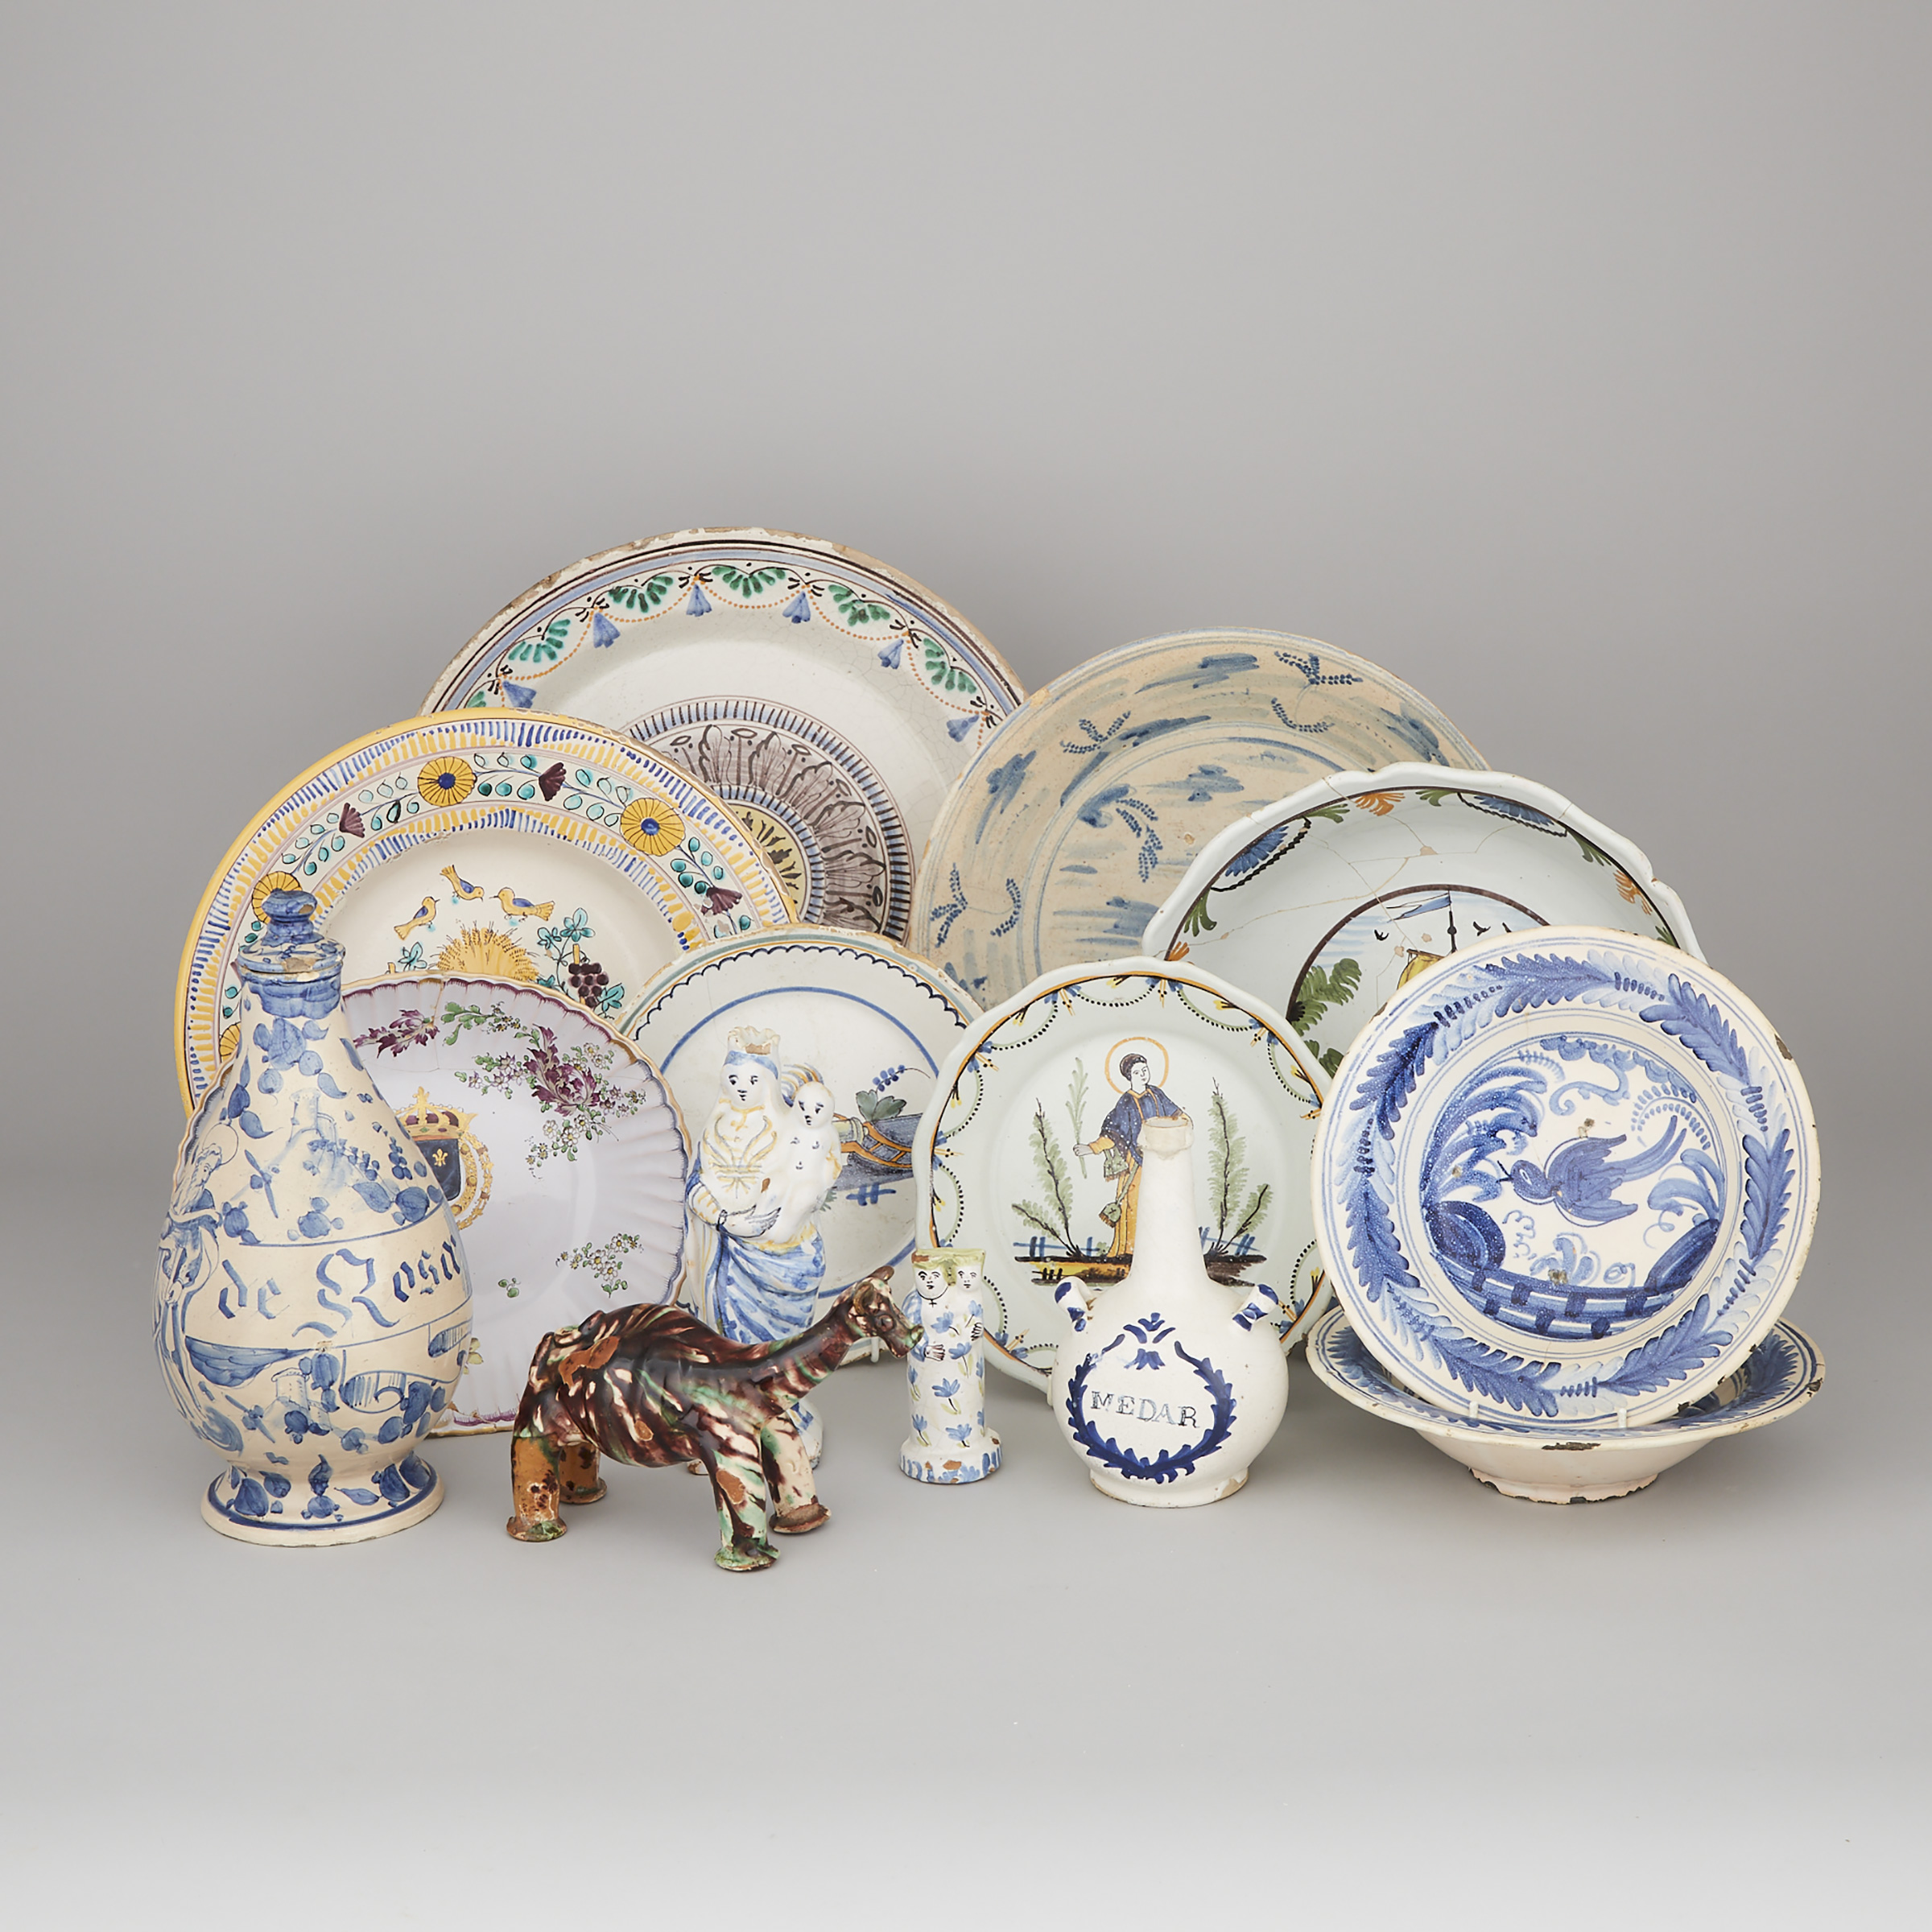 Group of Mainly South European Pottery, 18th-20th century